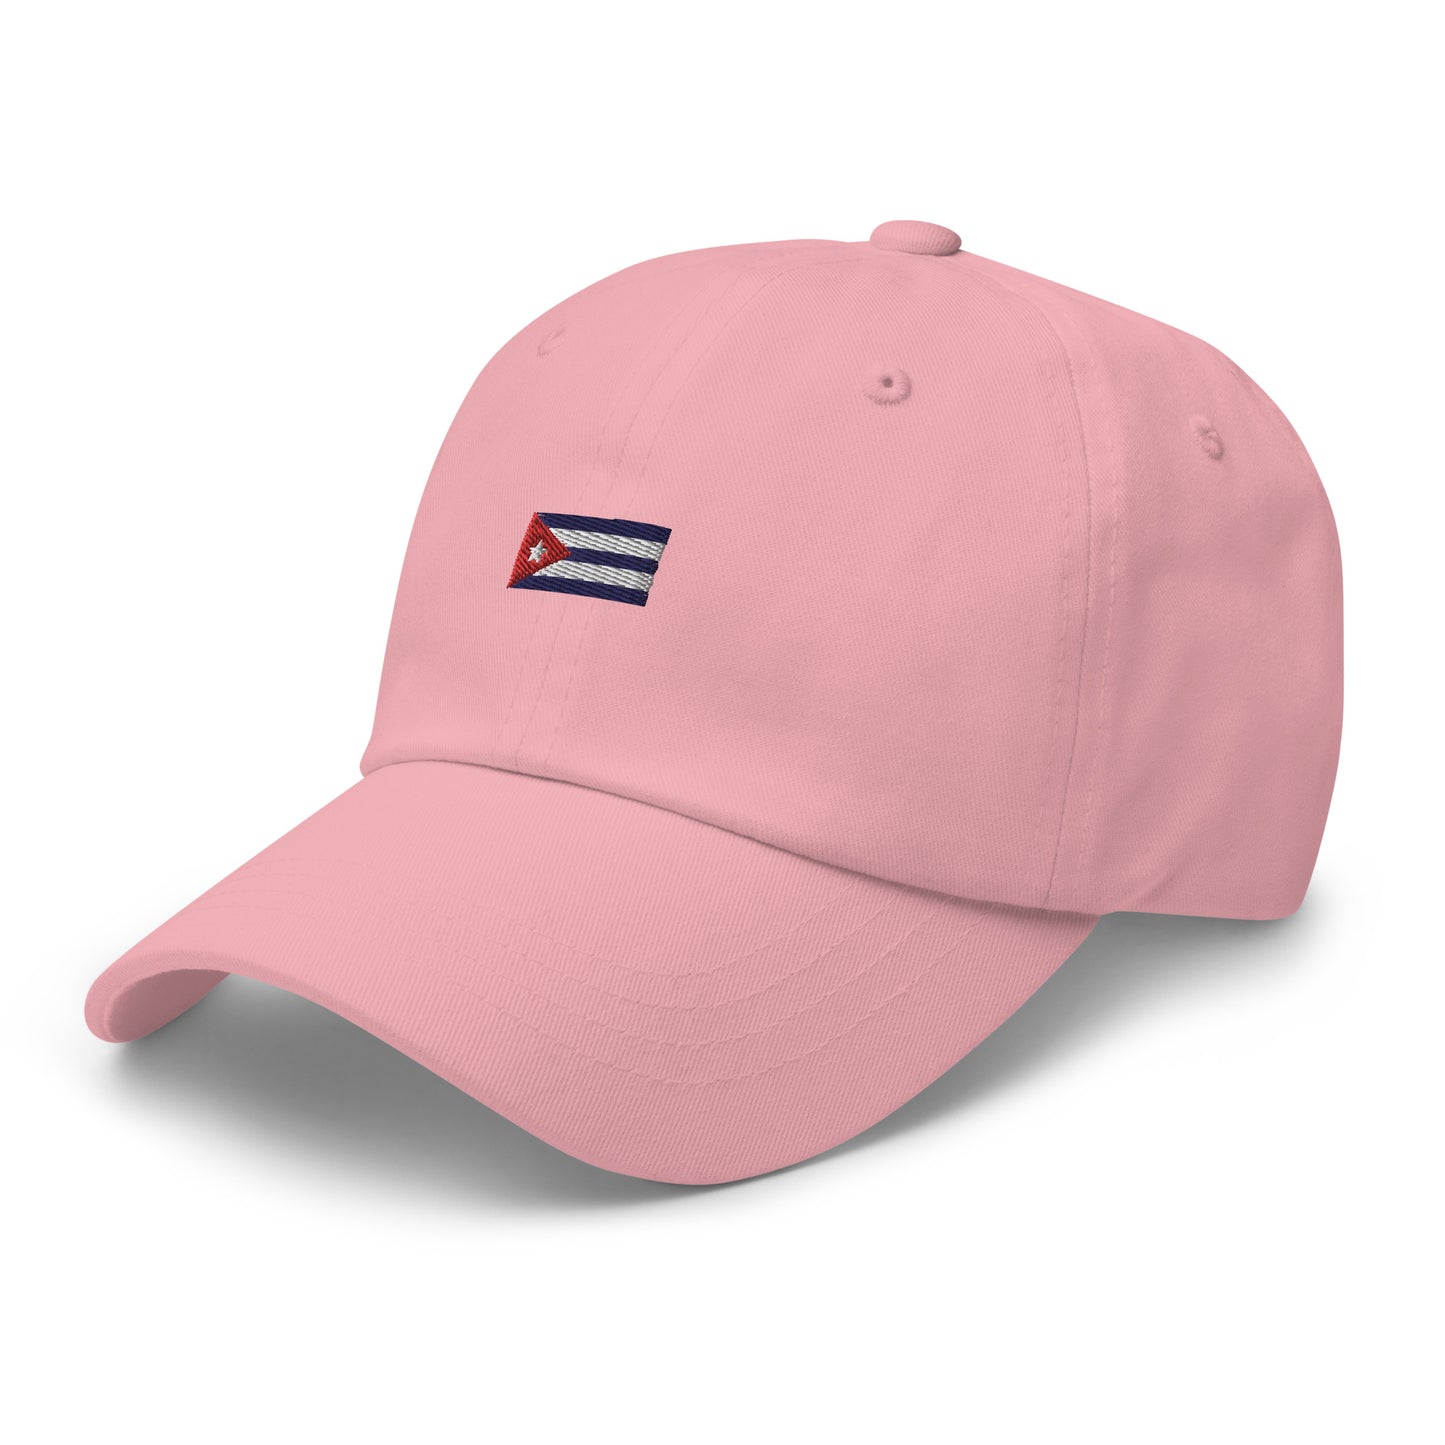 cap-from-the-front-with-cuban-flag